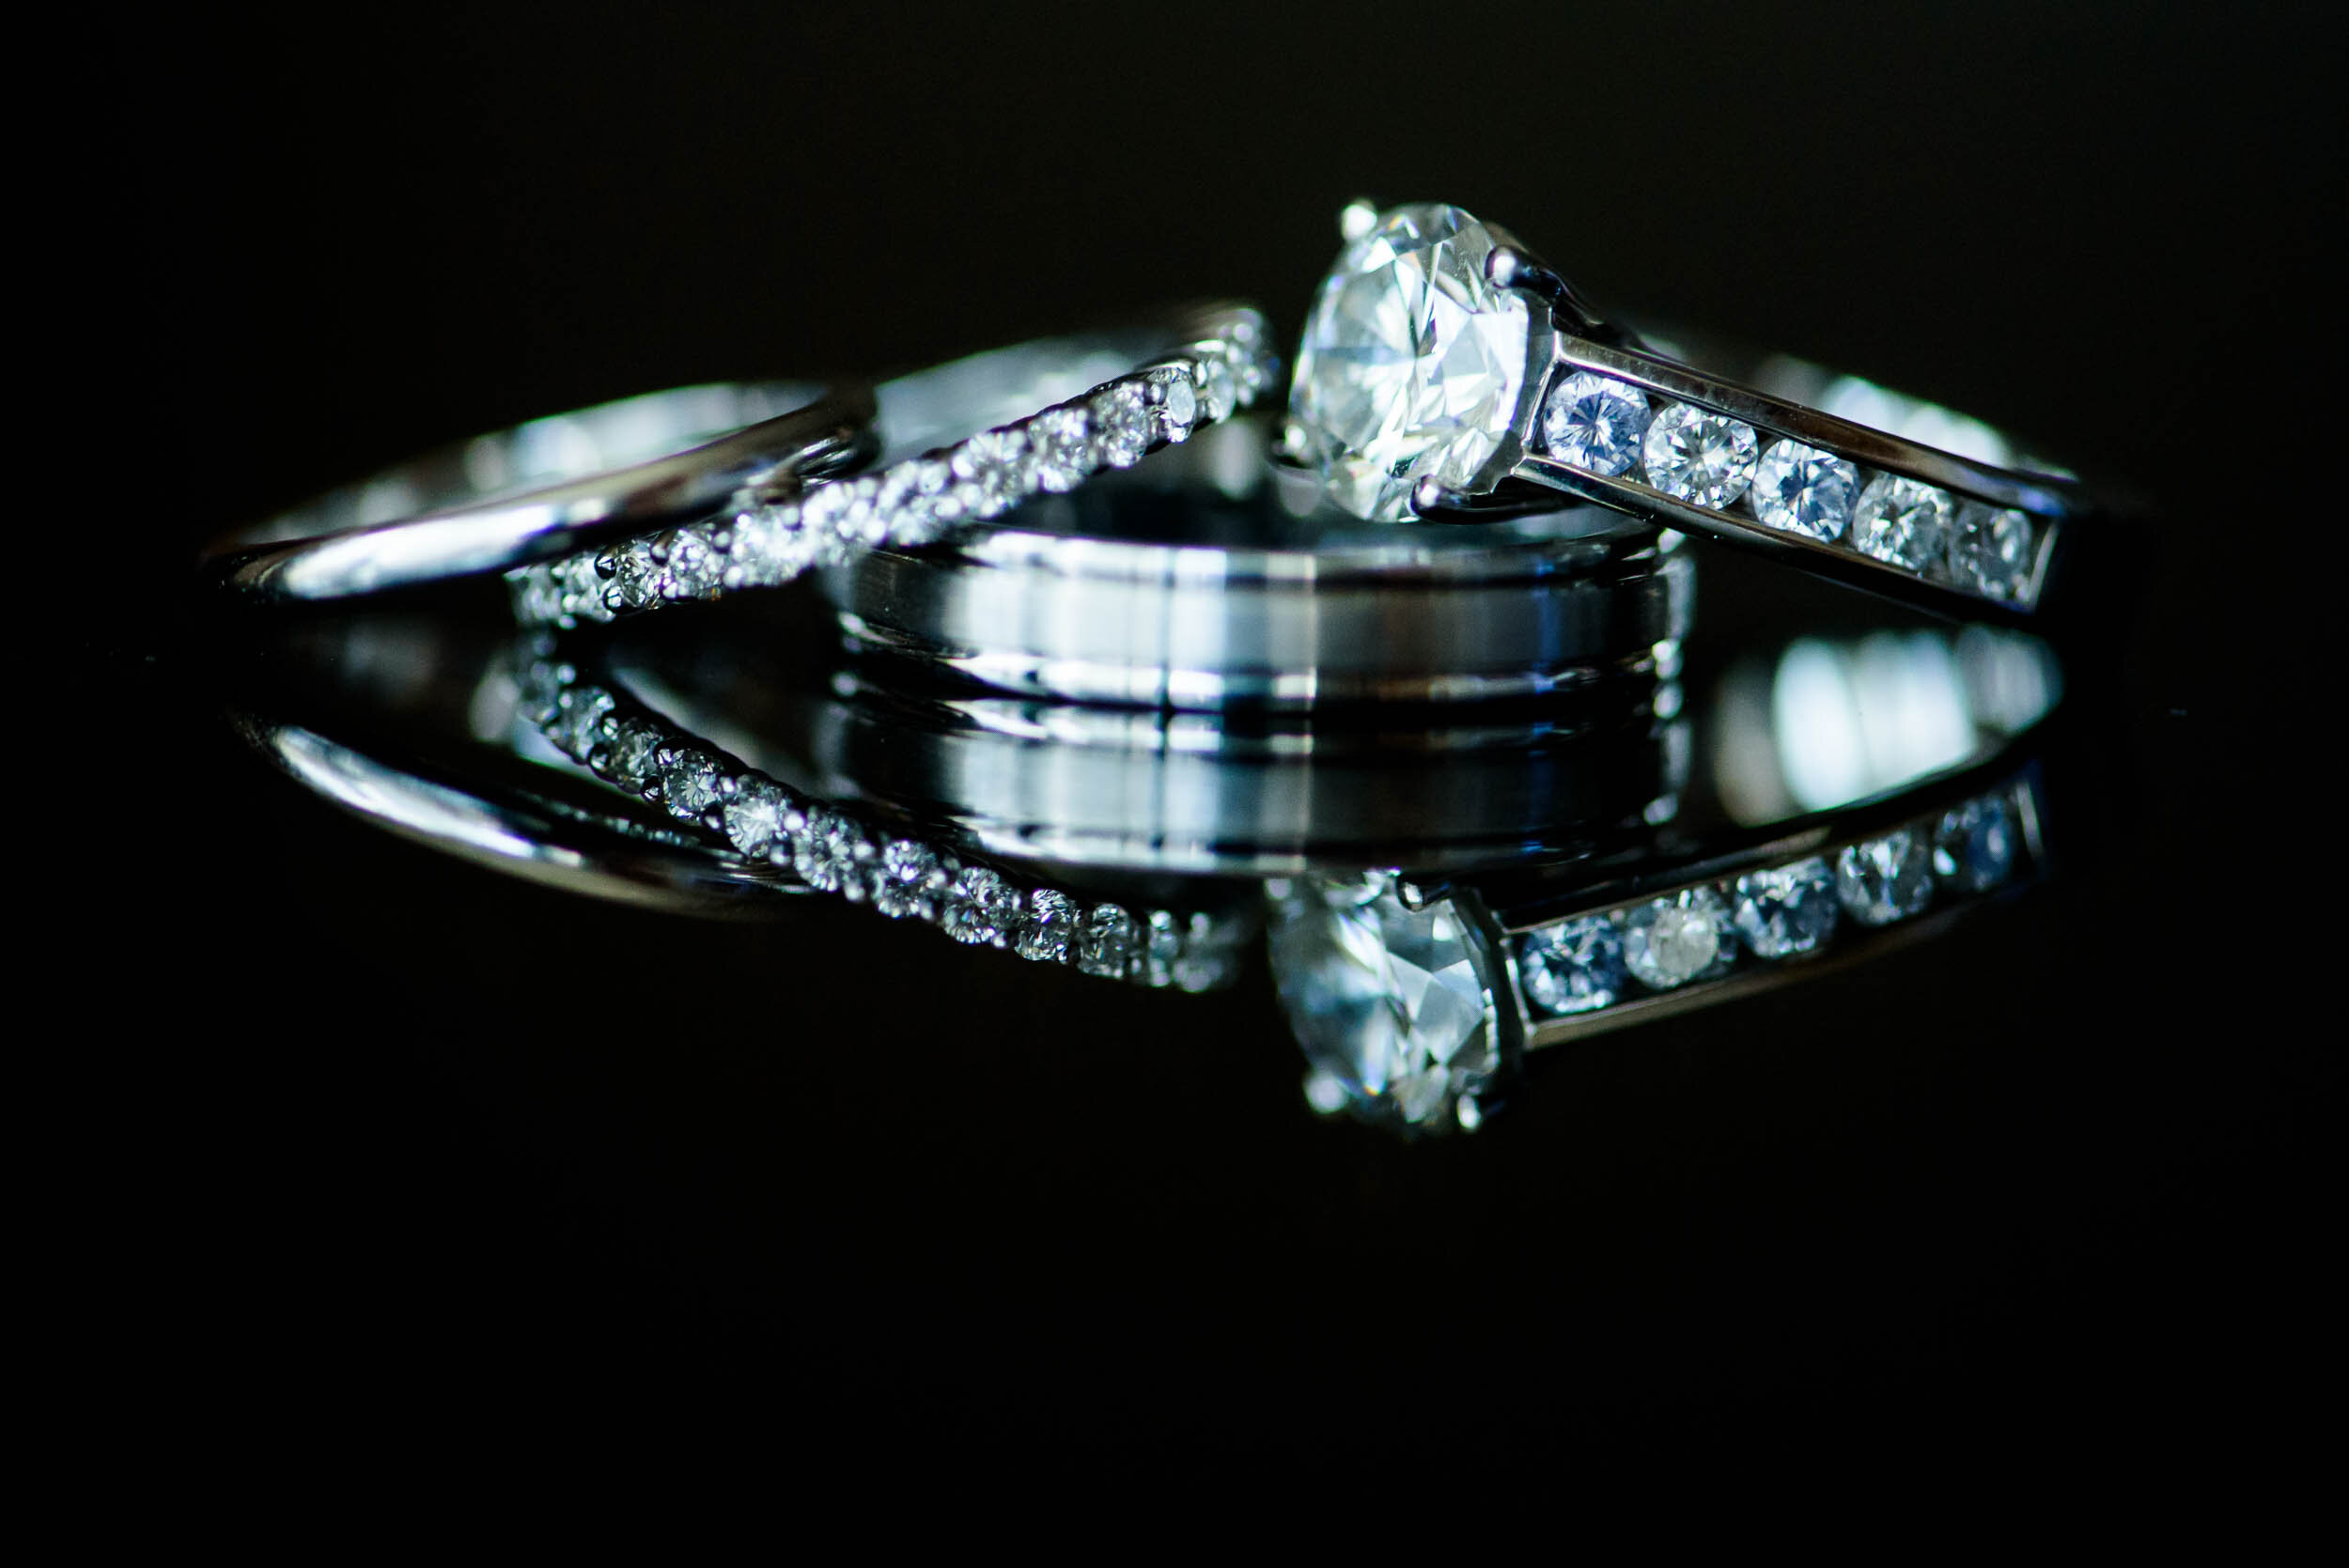 Wedding rings detail photo:  Ravenswood Event Center Chicago wedding captured by J. Brown Photography.  